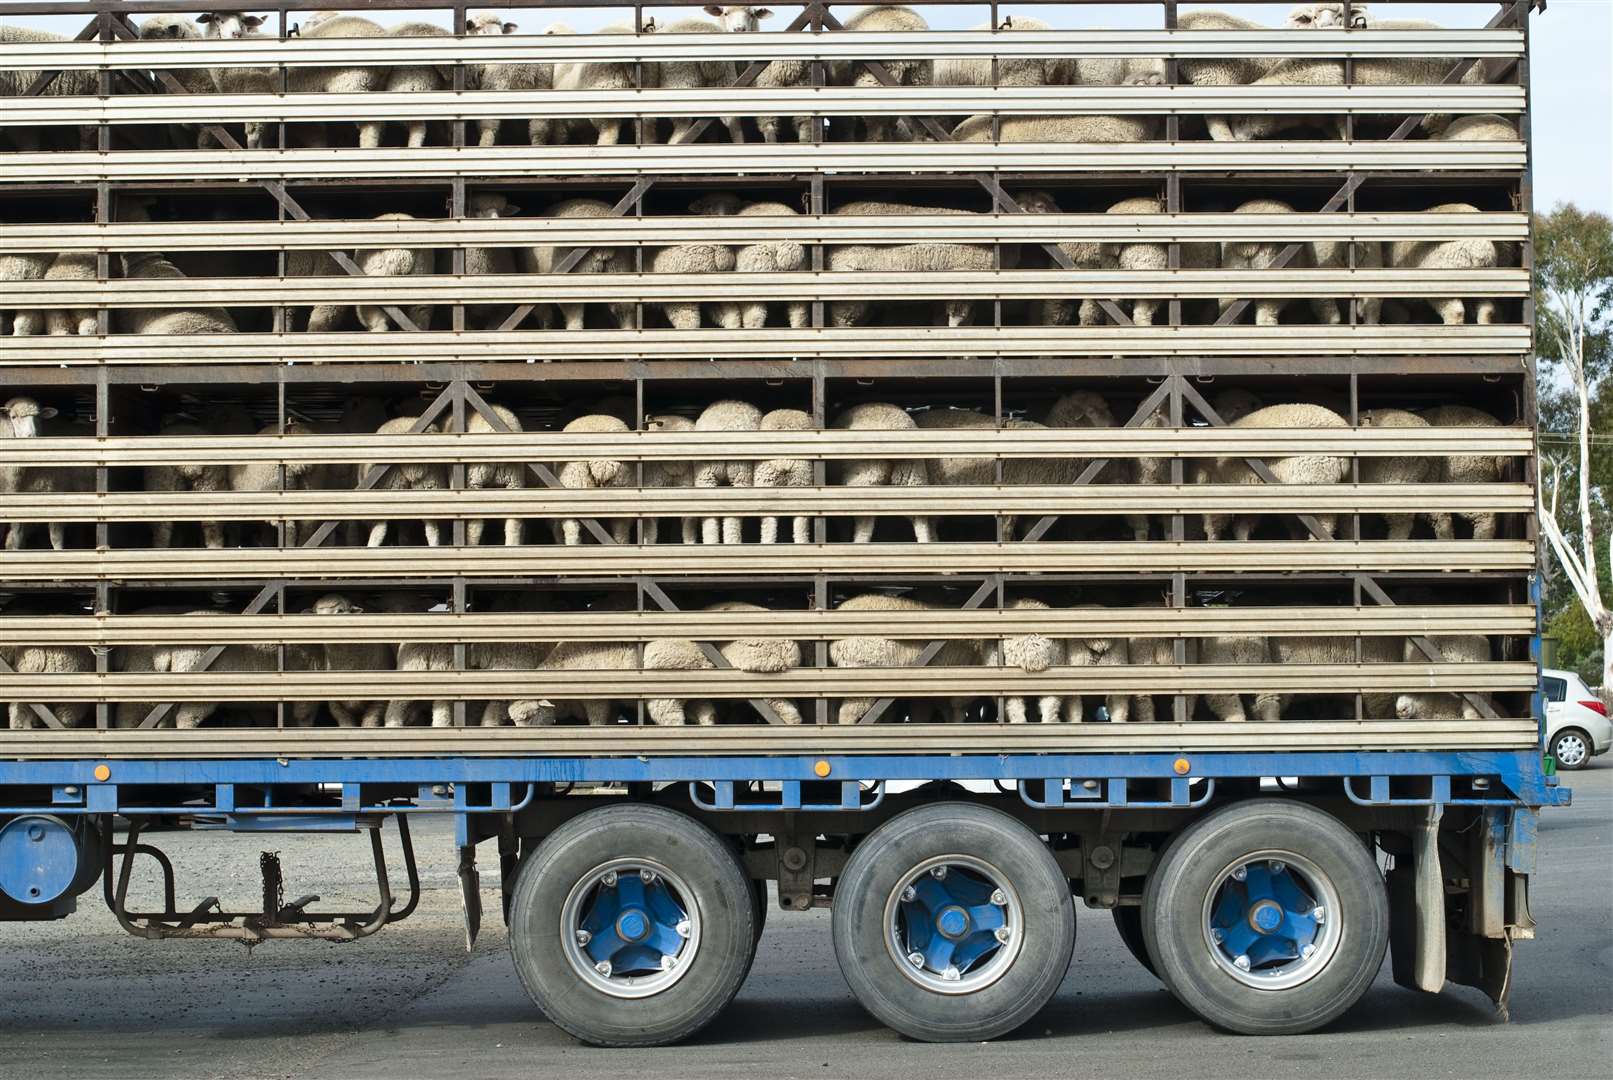 A consultation is ongoing into changes to animal transport rules.